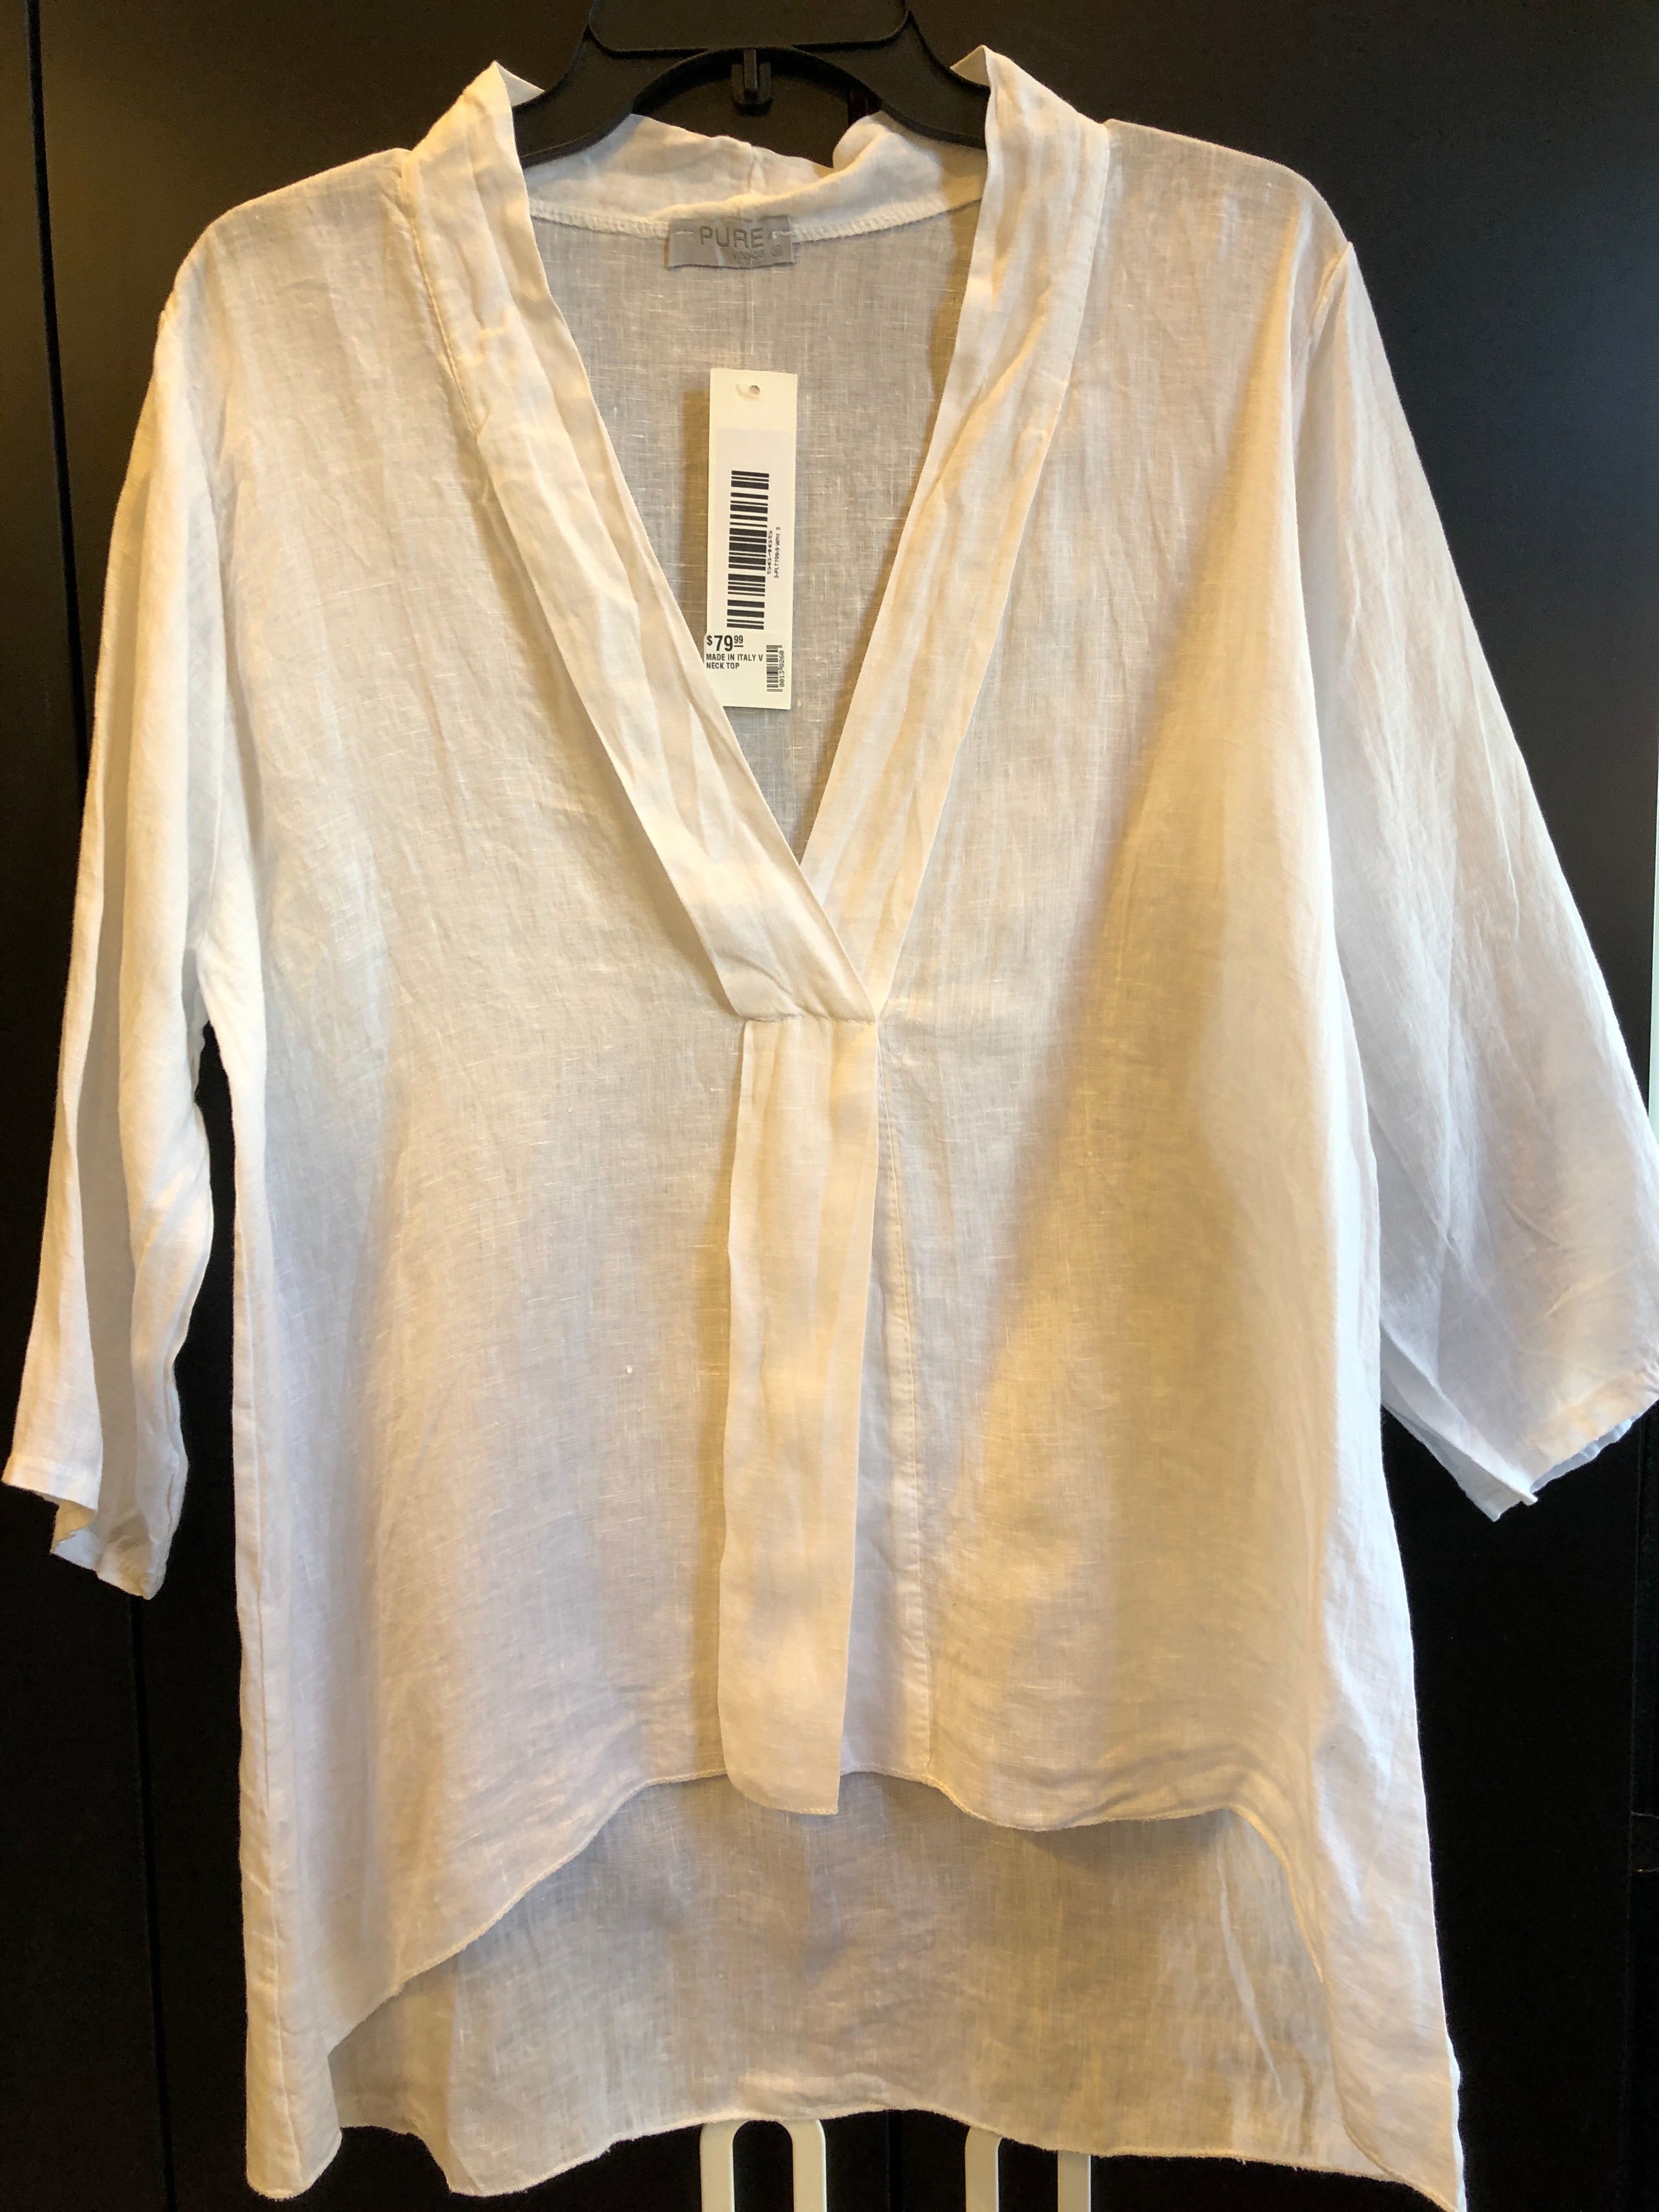 MADE IN ITALY V NECK TOP RUST / WHITE